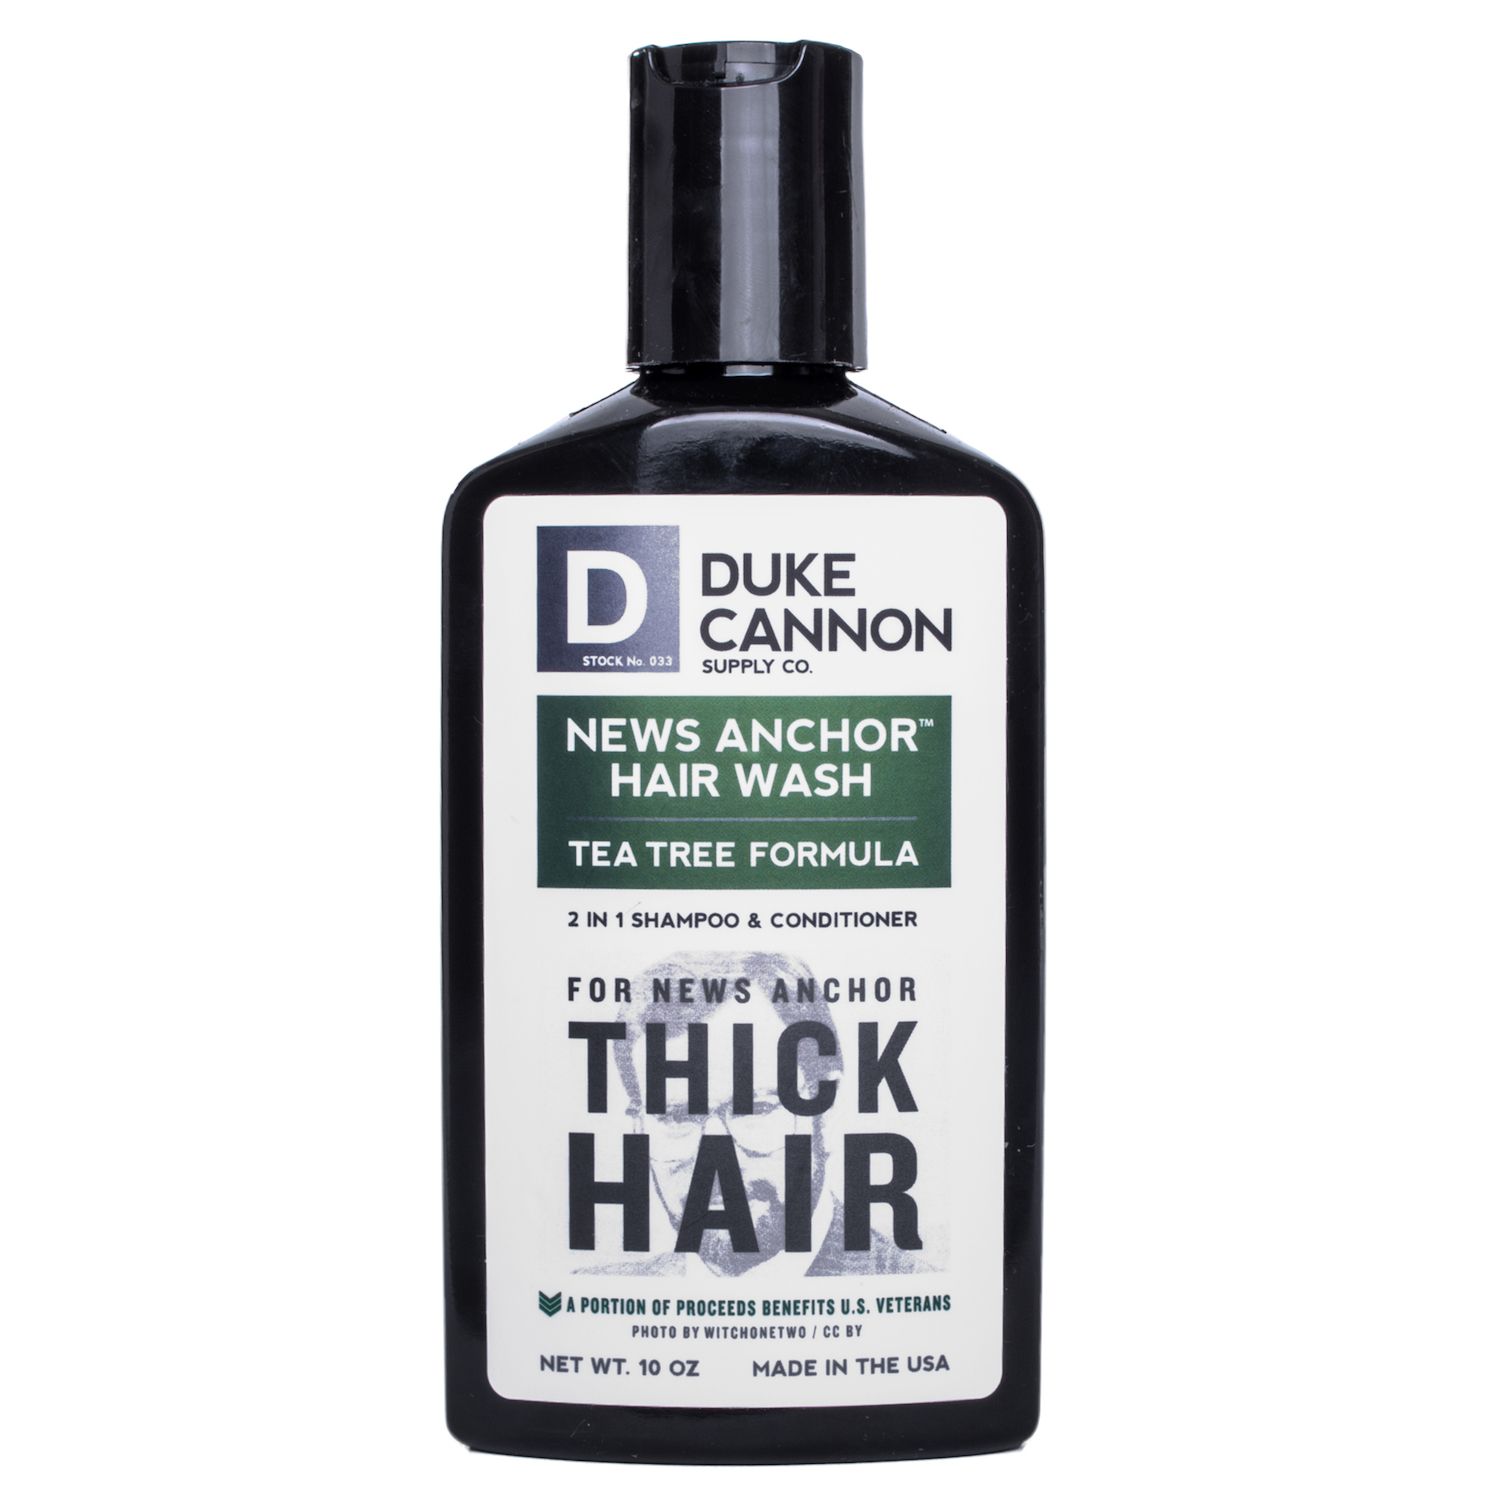 Image for Duke Cannon Supply Co. News Anchor 2-in-1 Hair Wash - Tea Tree Formula at Kohl's.